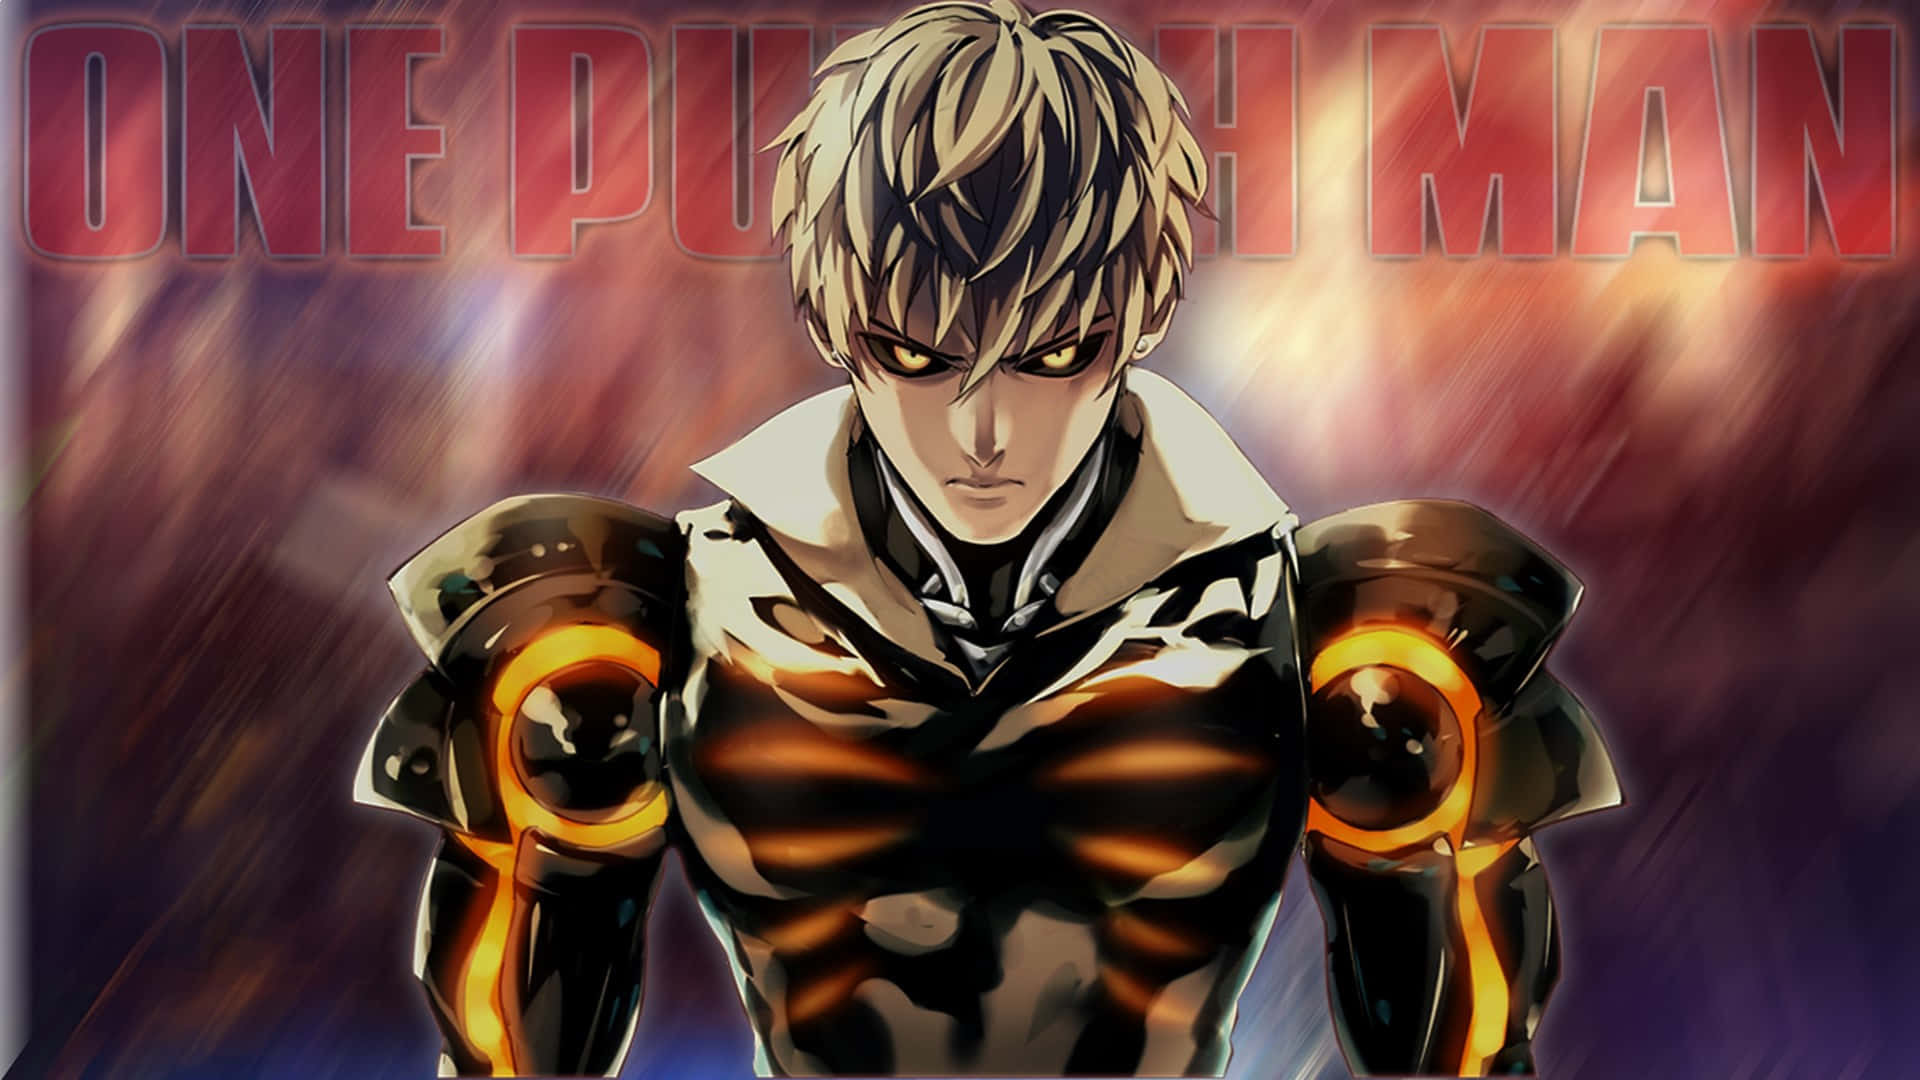 Futuristic Genos from One Punch Man in Action Wallpaper